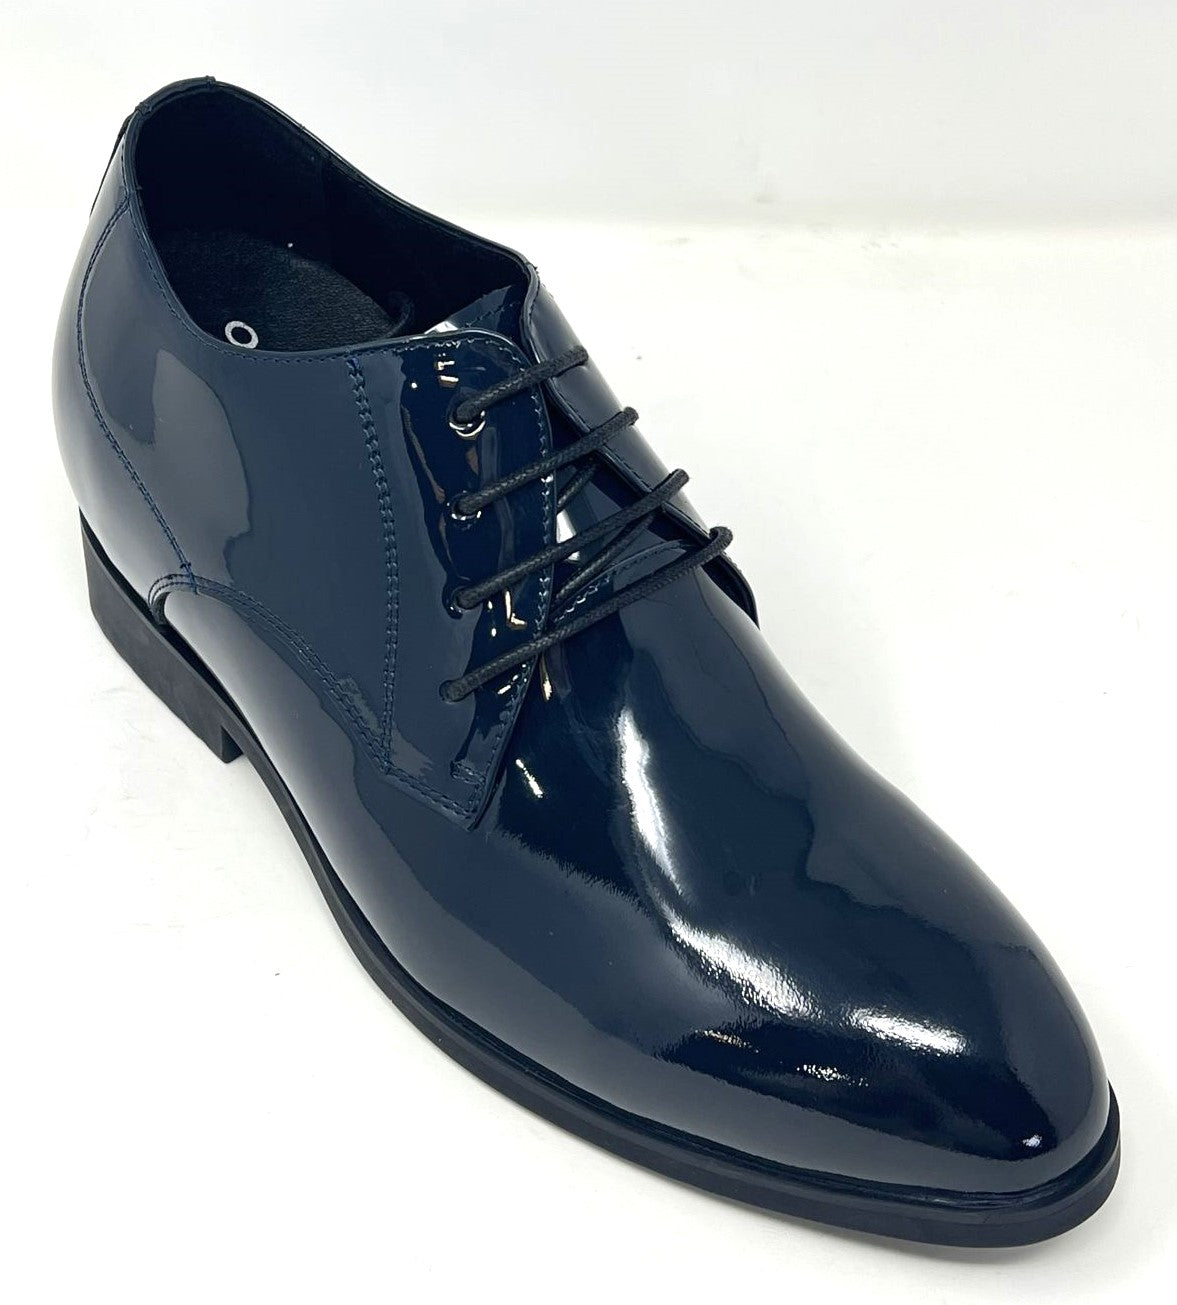 FSC0128 - 3.4 Inches Taller (Blue) - Size 9 Only